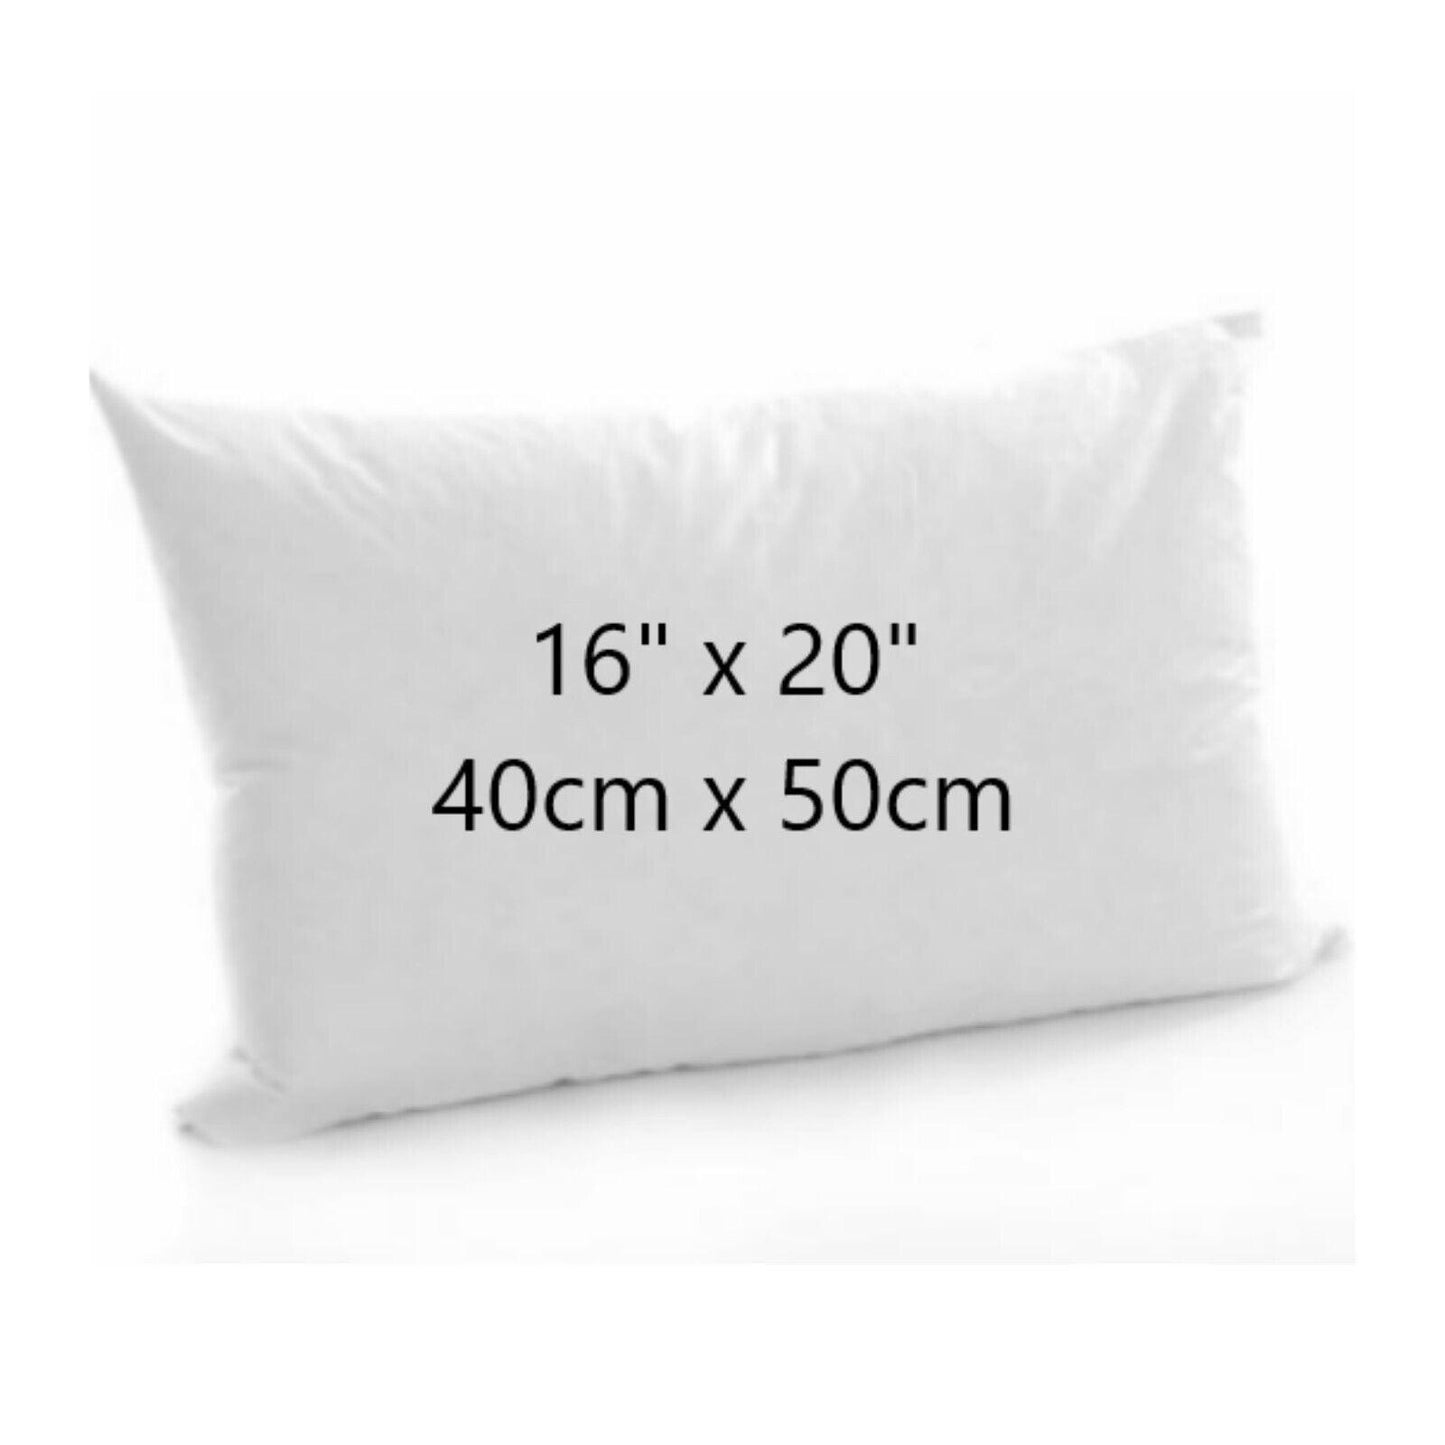 Hollowfibre Cushion Pads Inner Inserts Scatters Filler Deep Filled Plump Cushion - Arlinens